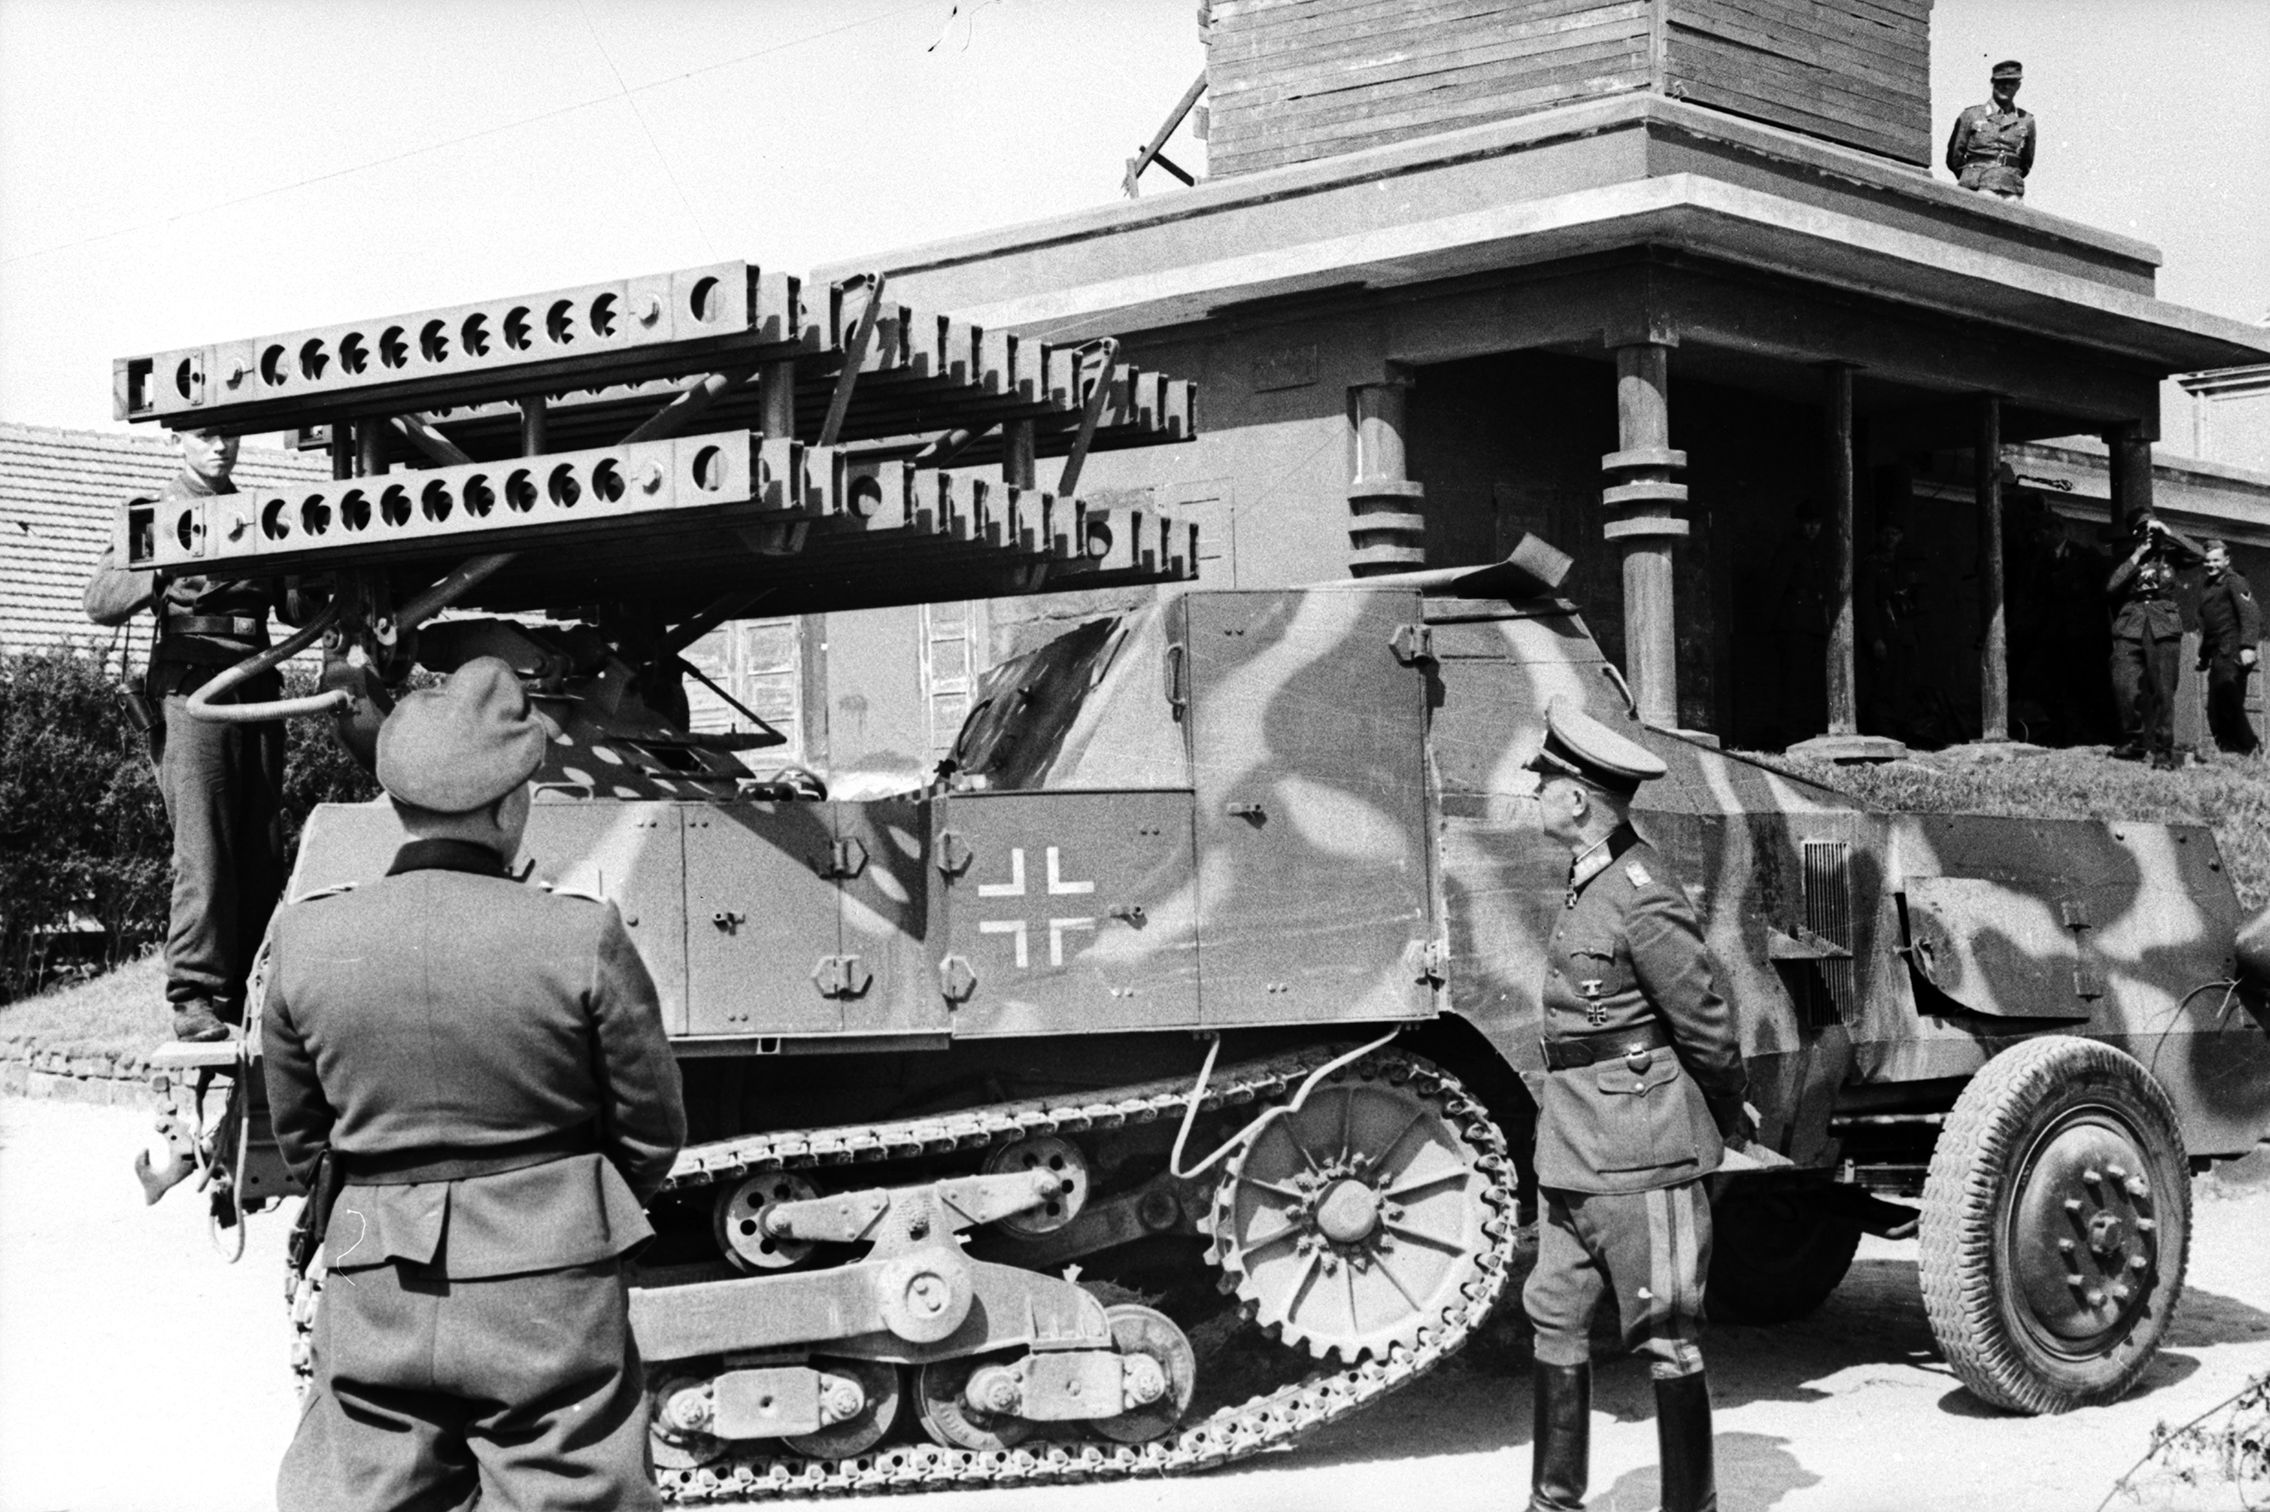 Becker (left) observes one of his designs: a multi-barreled rocket launcher known as a Vielfachwerfer, mounted on a French armored Somua MCG halftrack. Becker was skilled at converting captured enemy equipment into vehicles for German army use.